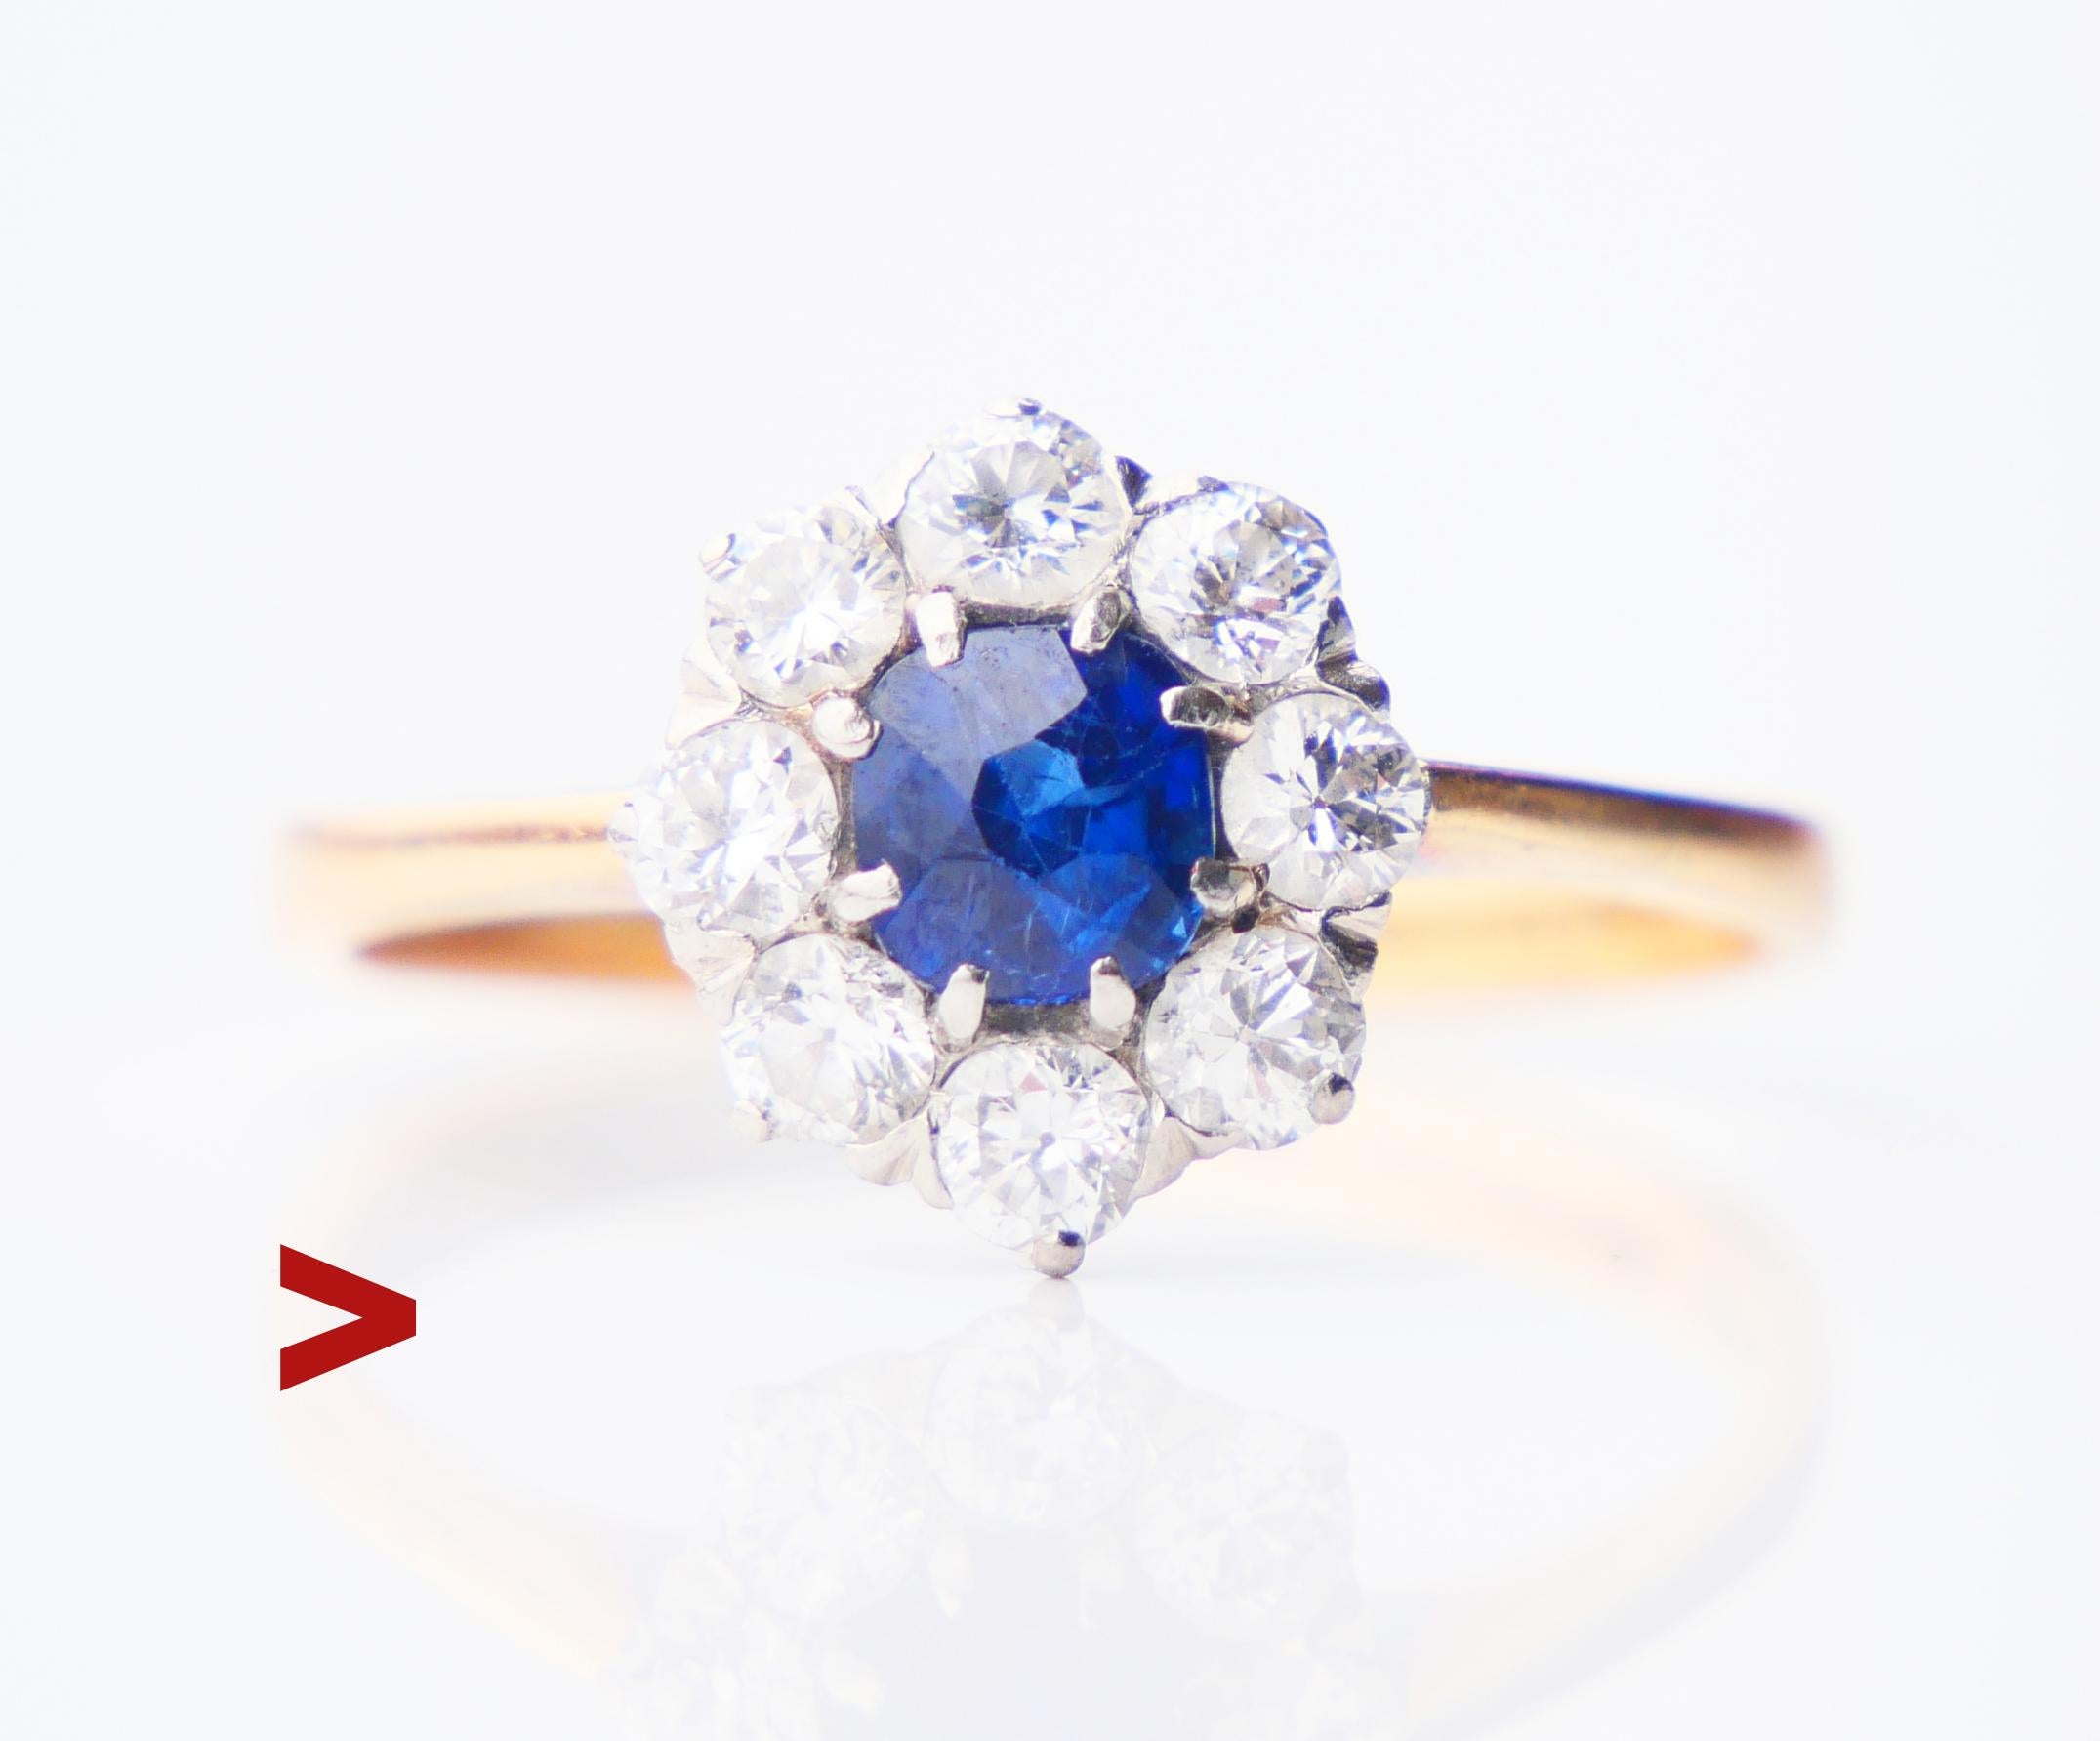 Beautiful Halo Ring in solid 18K Yellow Gold with natural Blue Sapphire and 8 Diamonds in White Gold / or Platinum settings.

Floret/ crown measures Ø 11 mm x 4.5 mm deep.
Natural Sapphire of old European diamond cut, color is medium Blue,